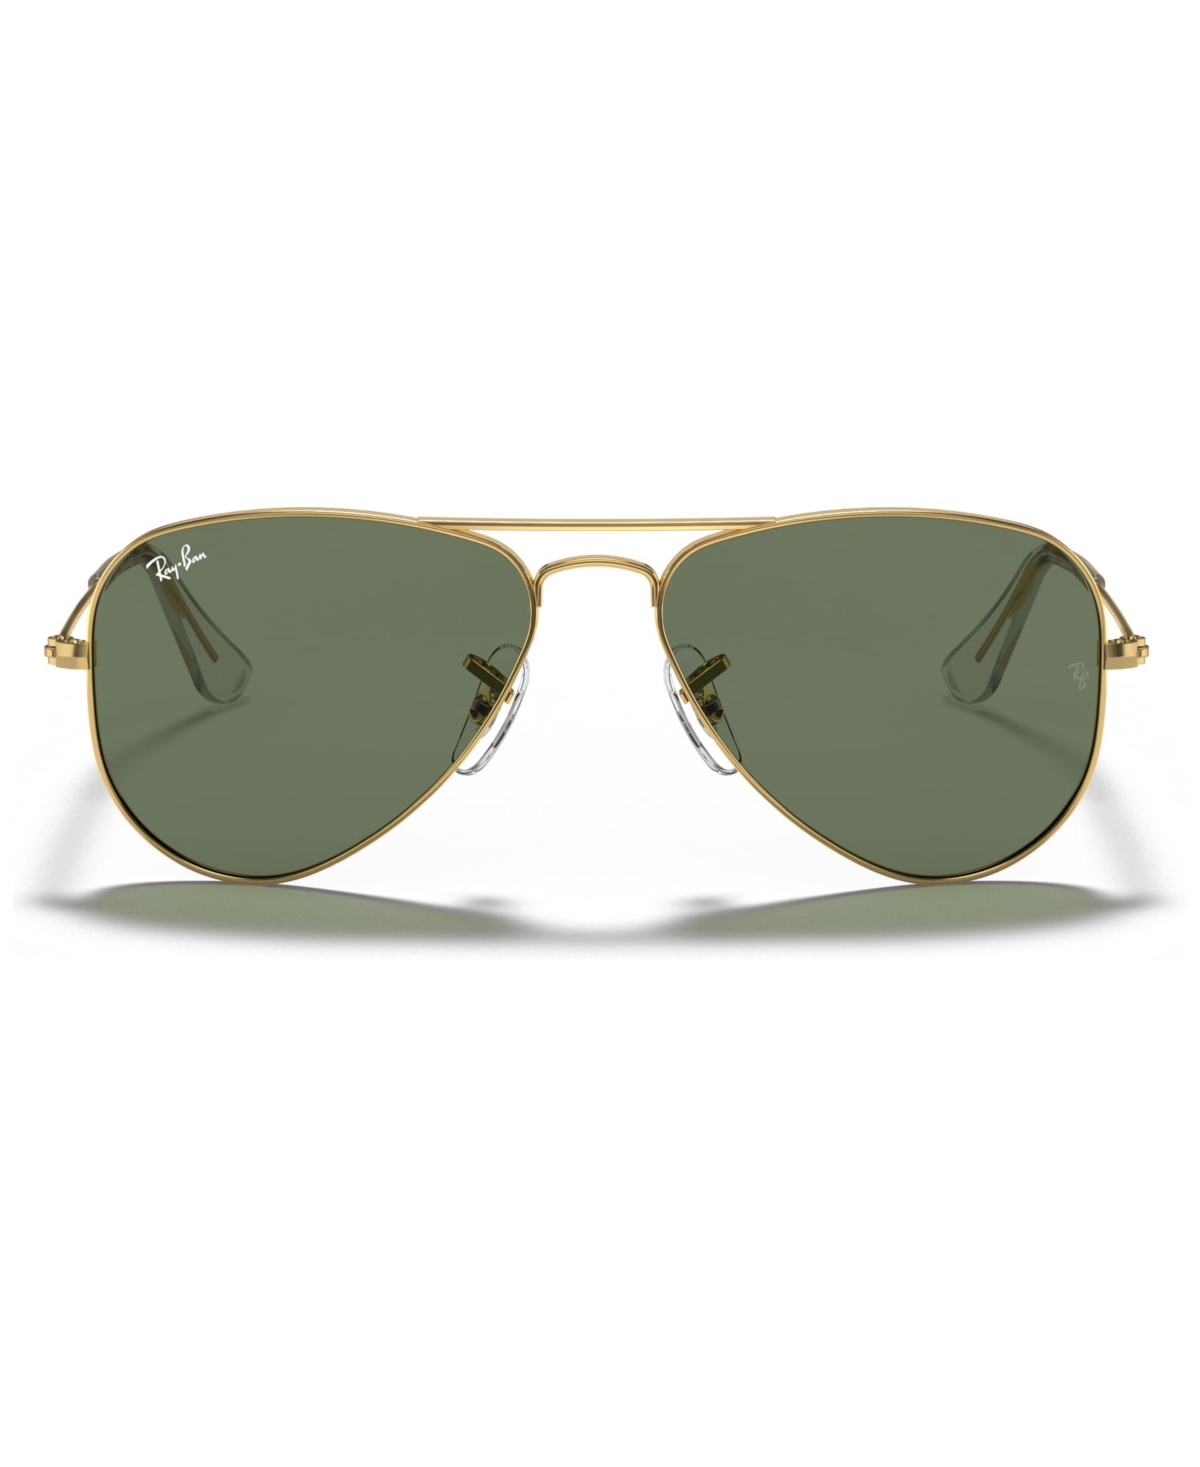 Ray-ban Jr . Kids Sunglasses, Rj9506s Aviator (ages 4-6) In Gold,green